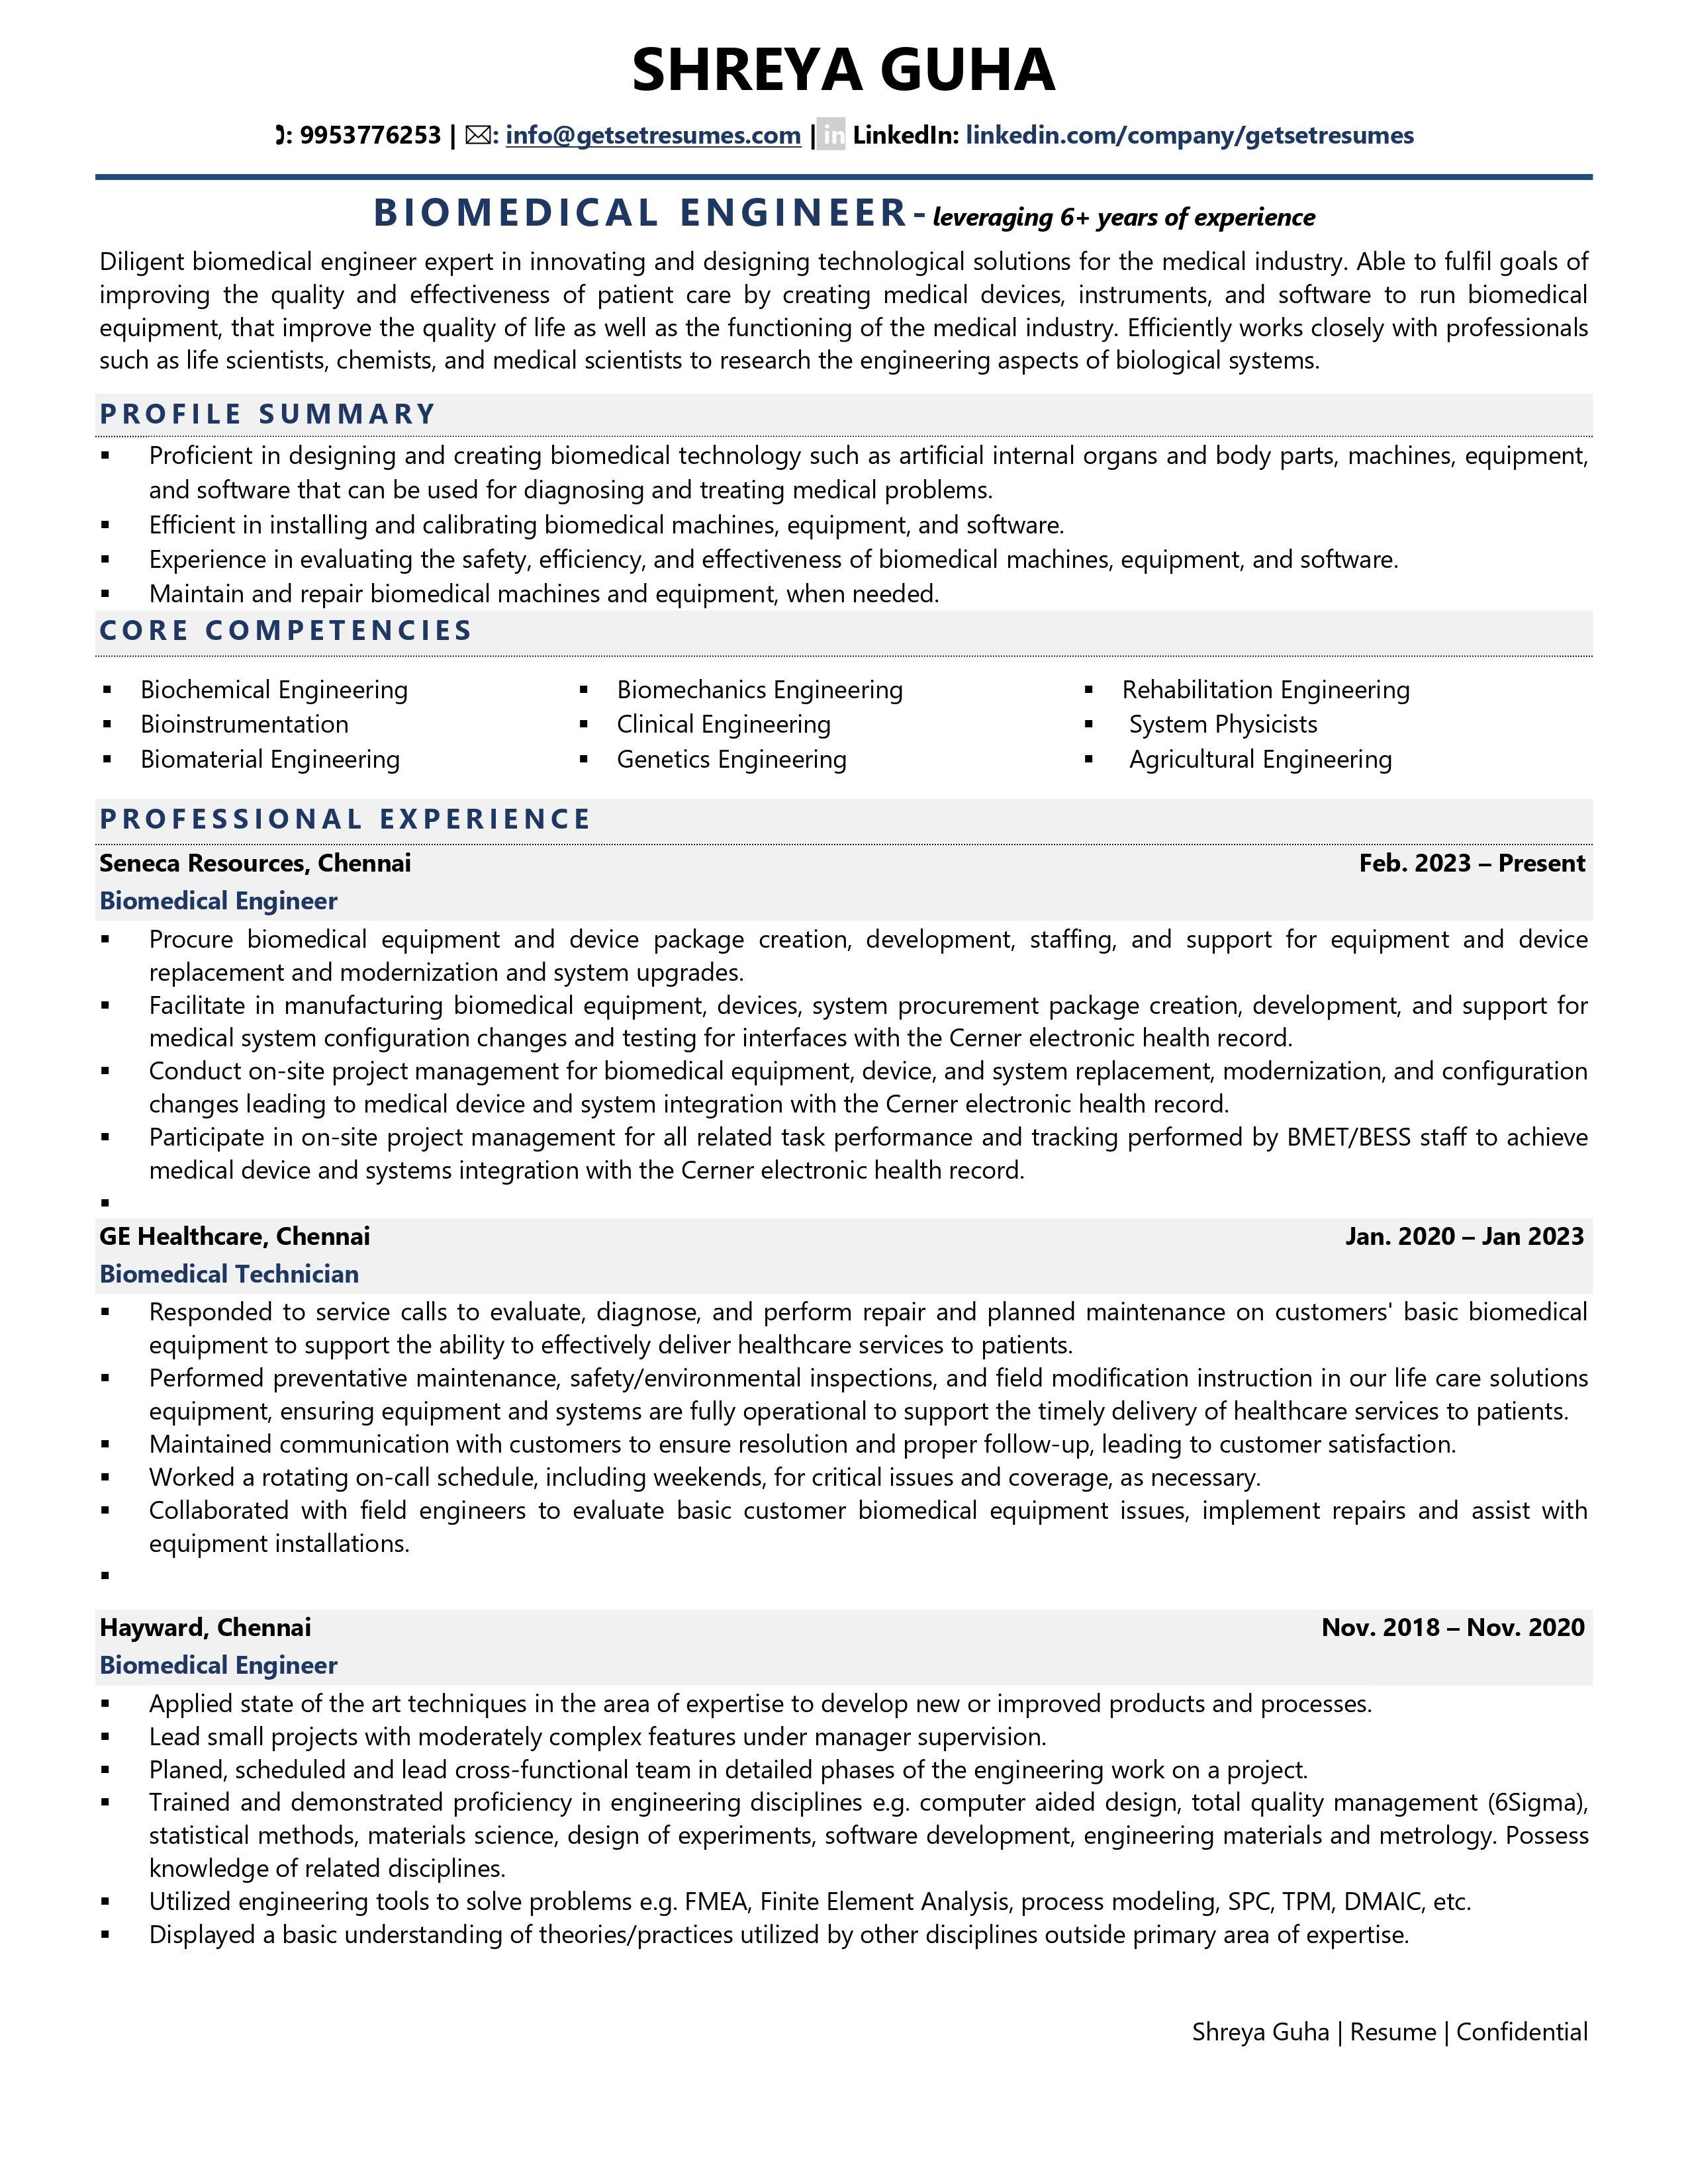 biomedical service engineer resume objective